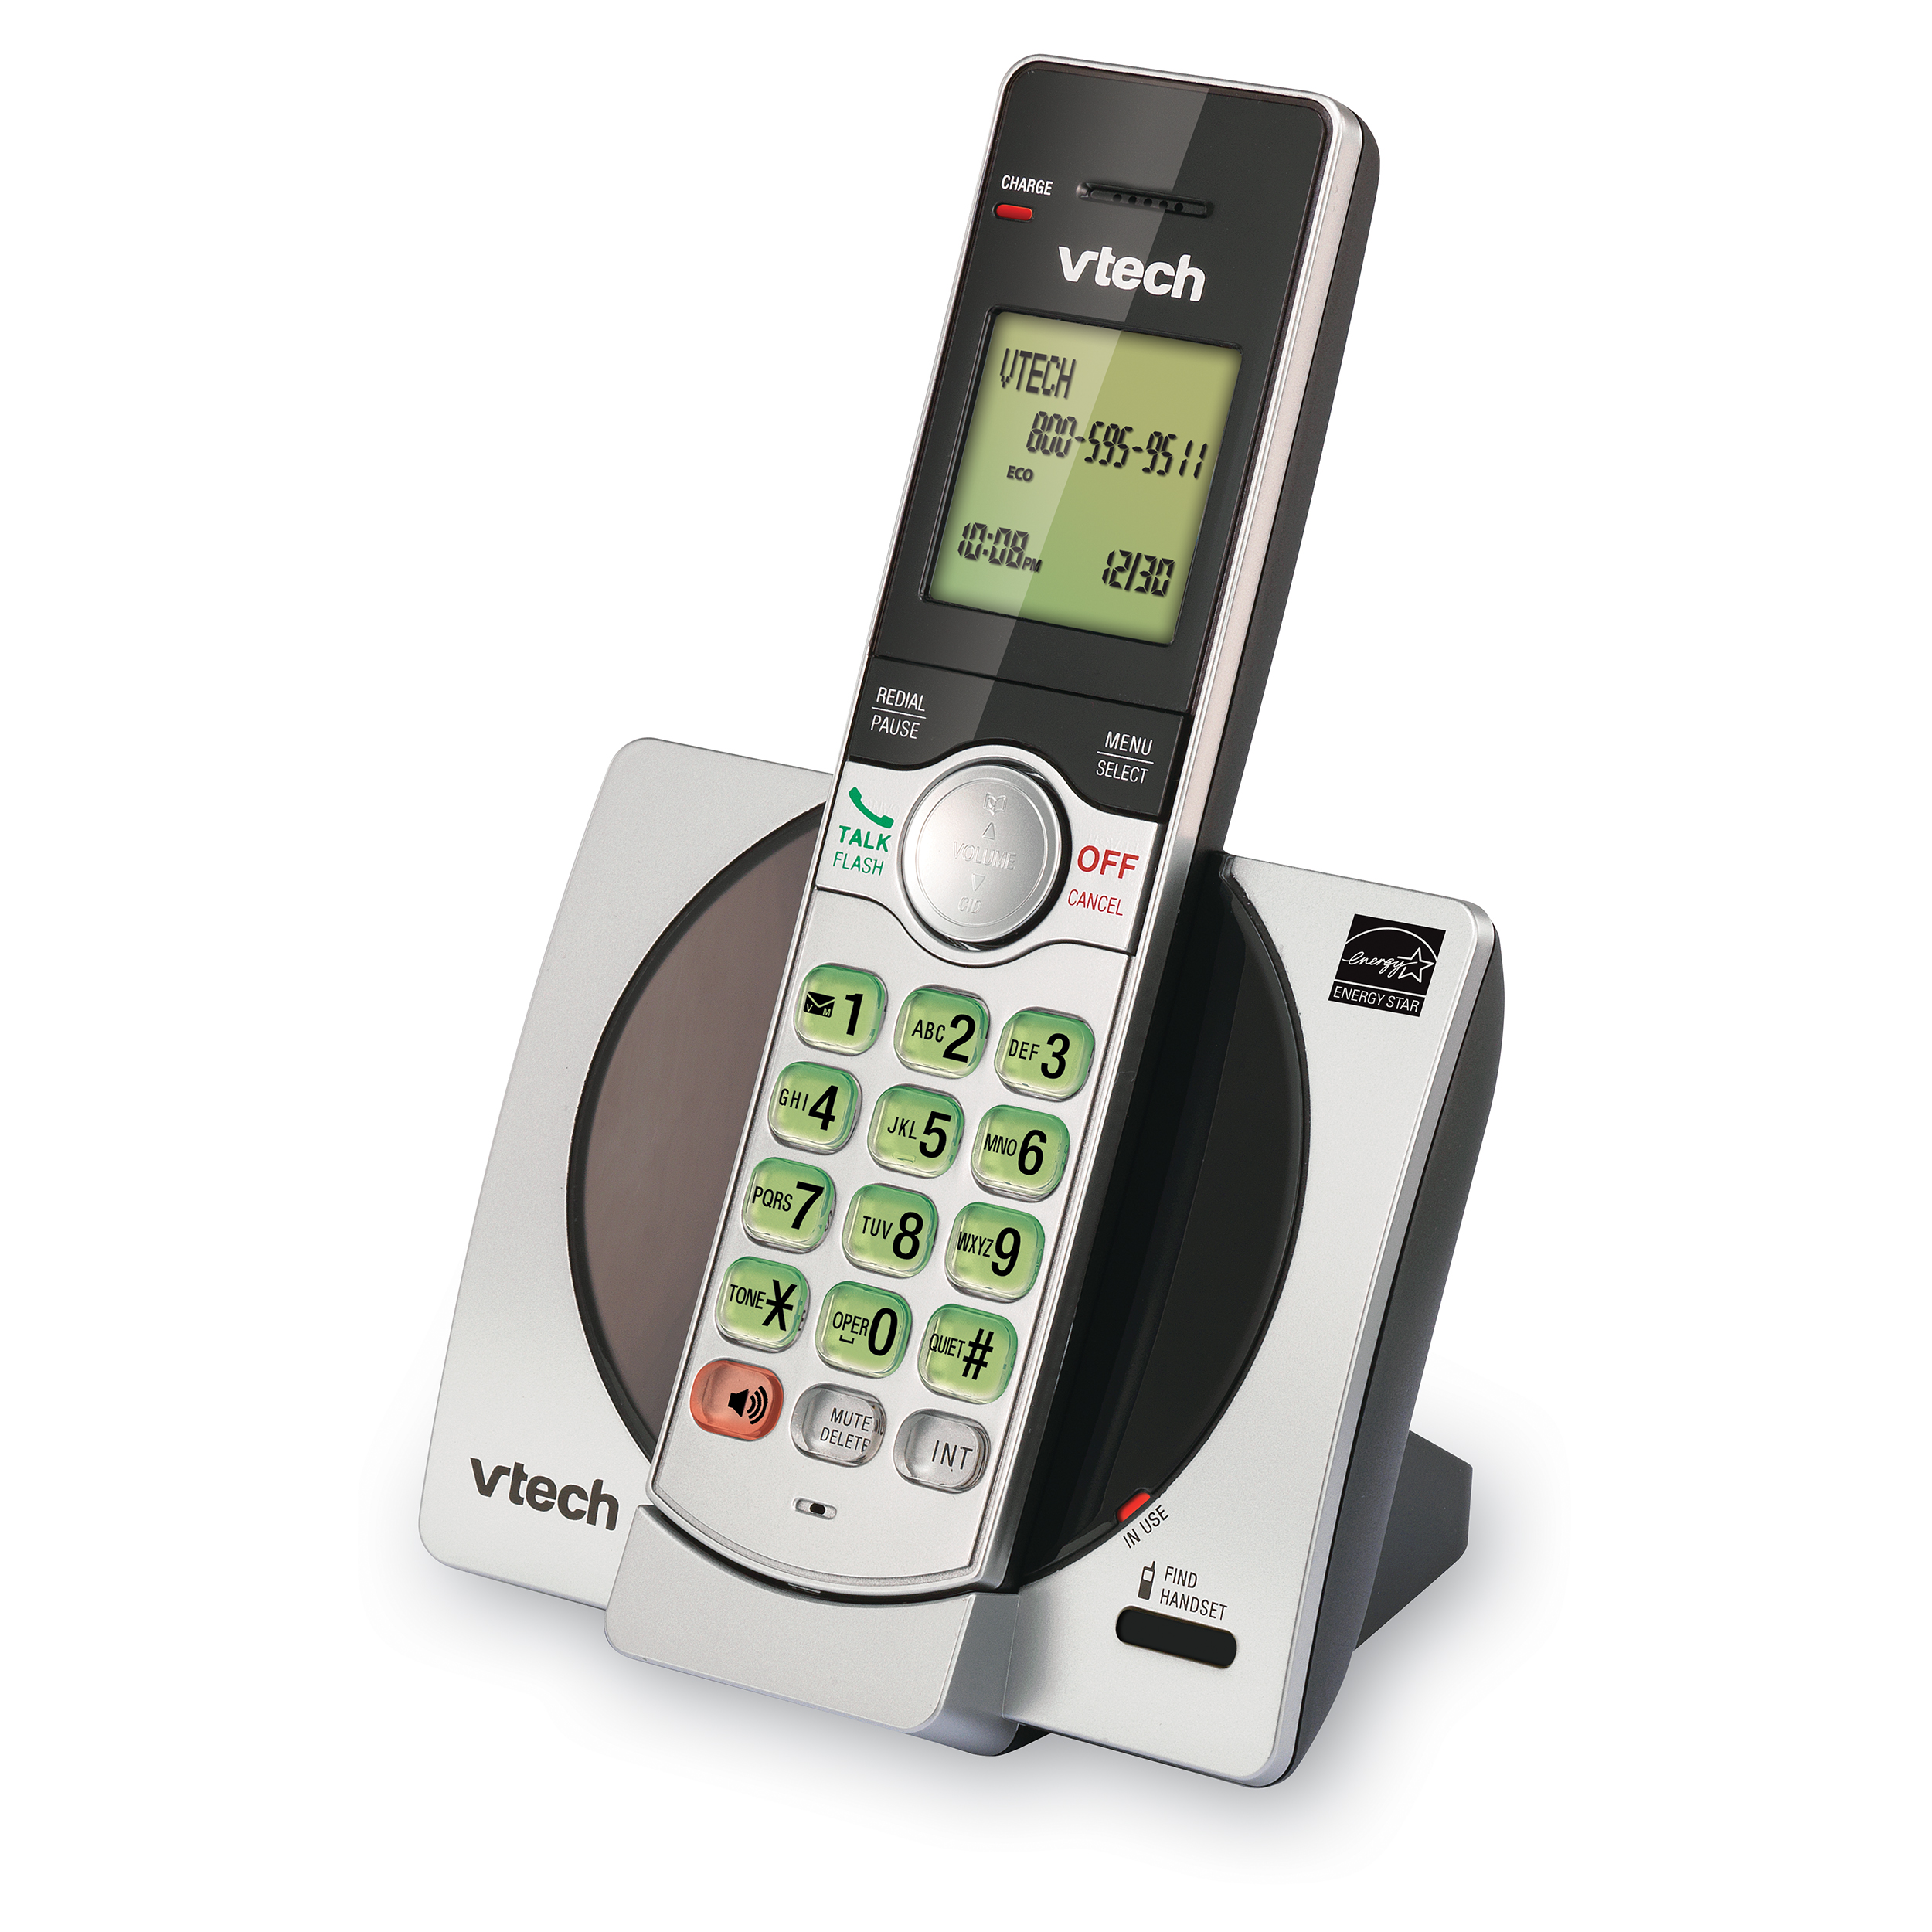 VTech DECT 6.0 Expandable Cordless Phone with Call Block, CS6919 (Silver & Black) - image 3 of 3